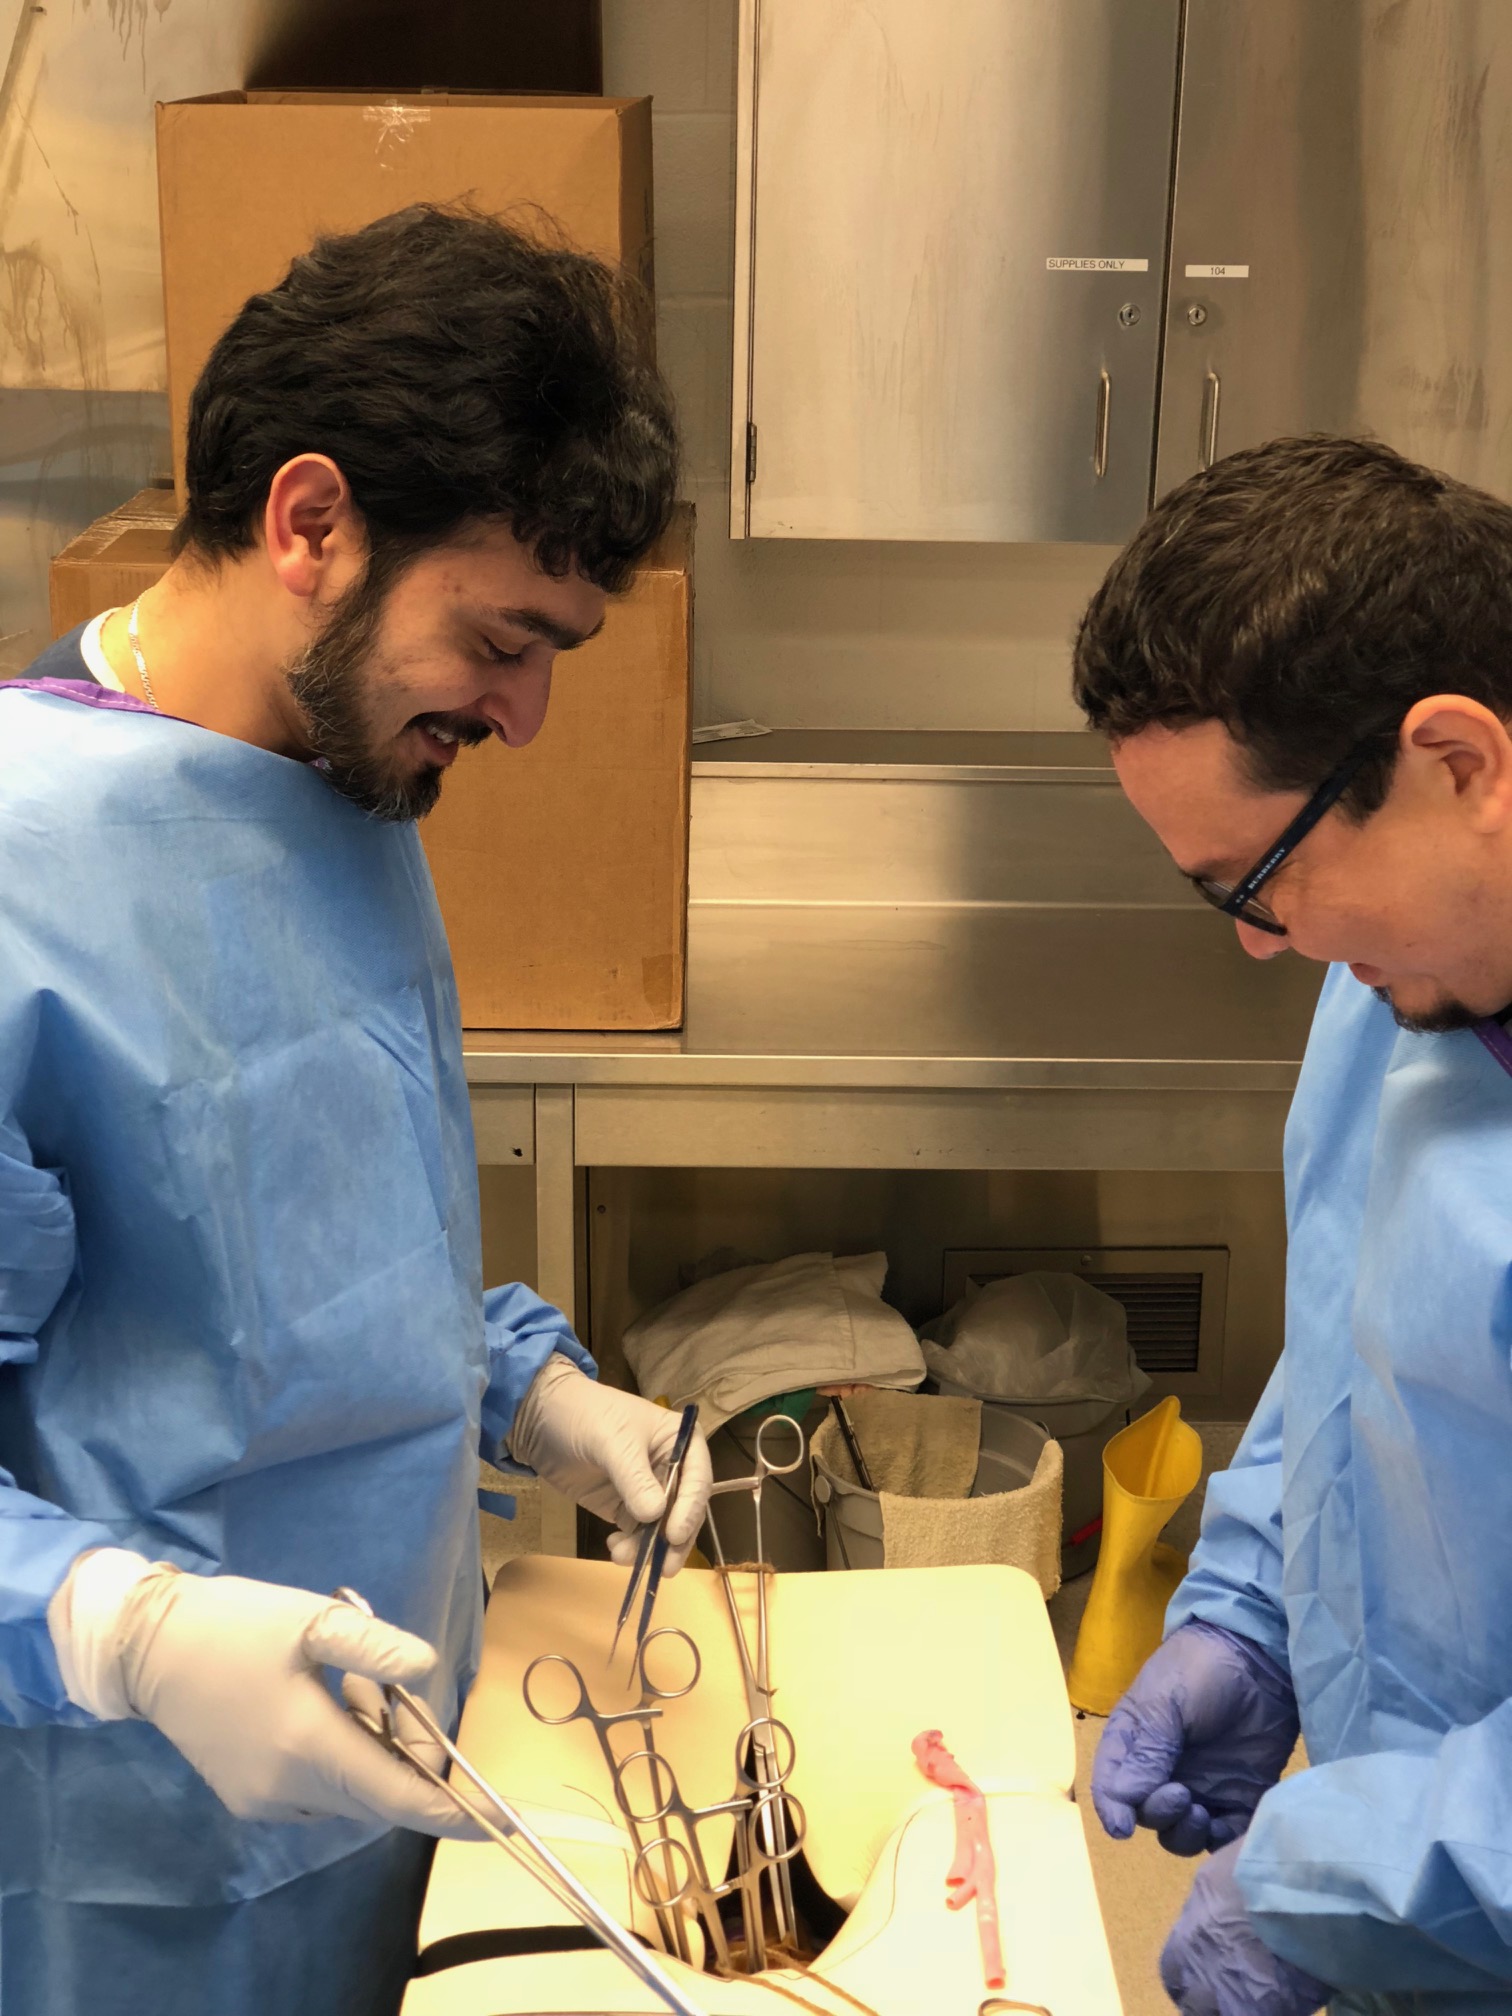 Two residents working with veins